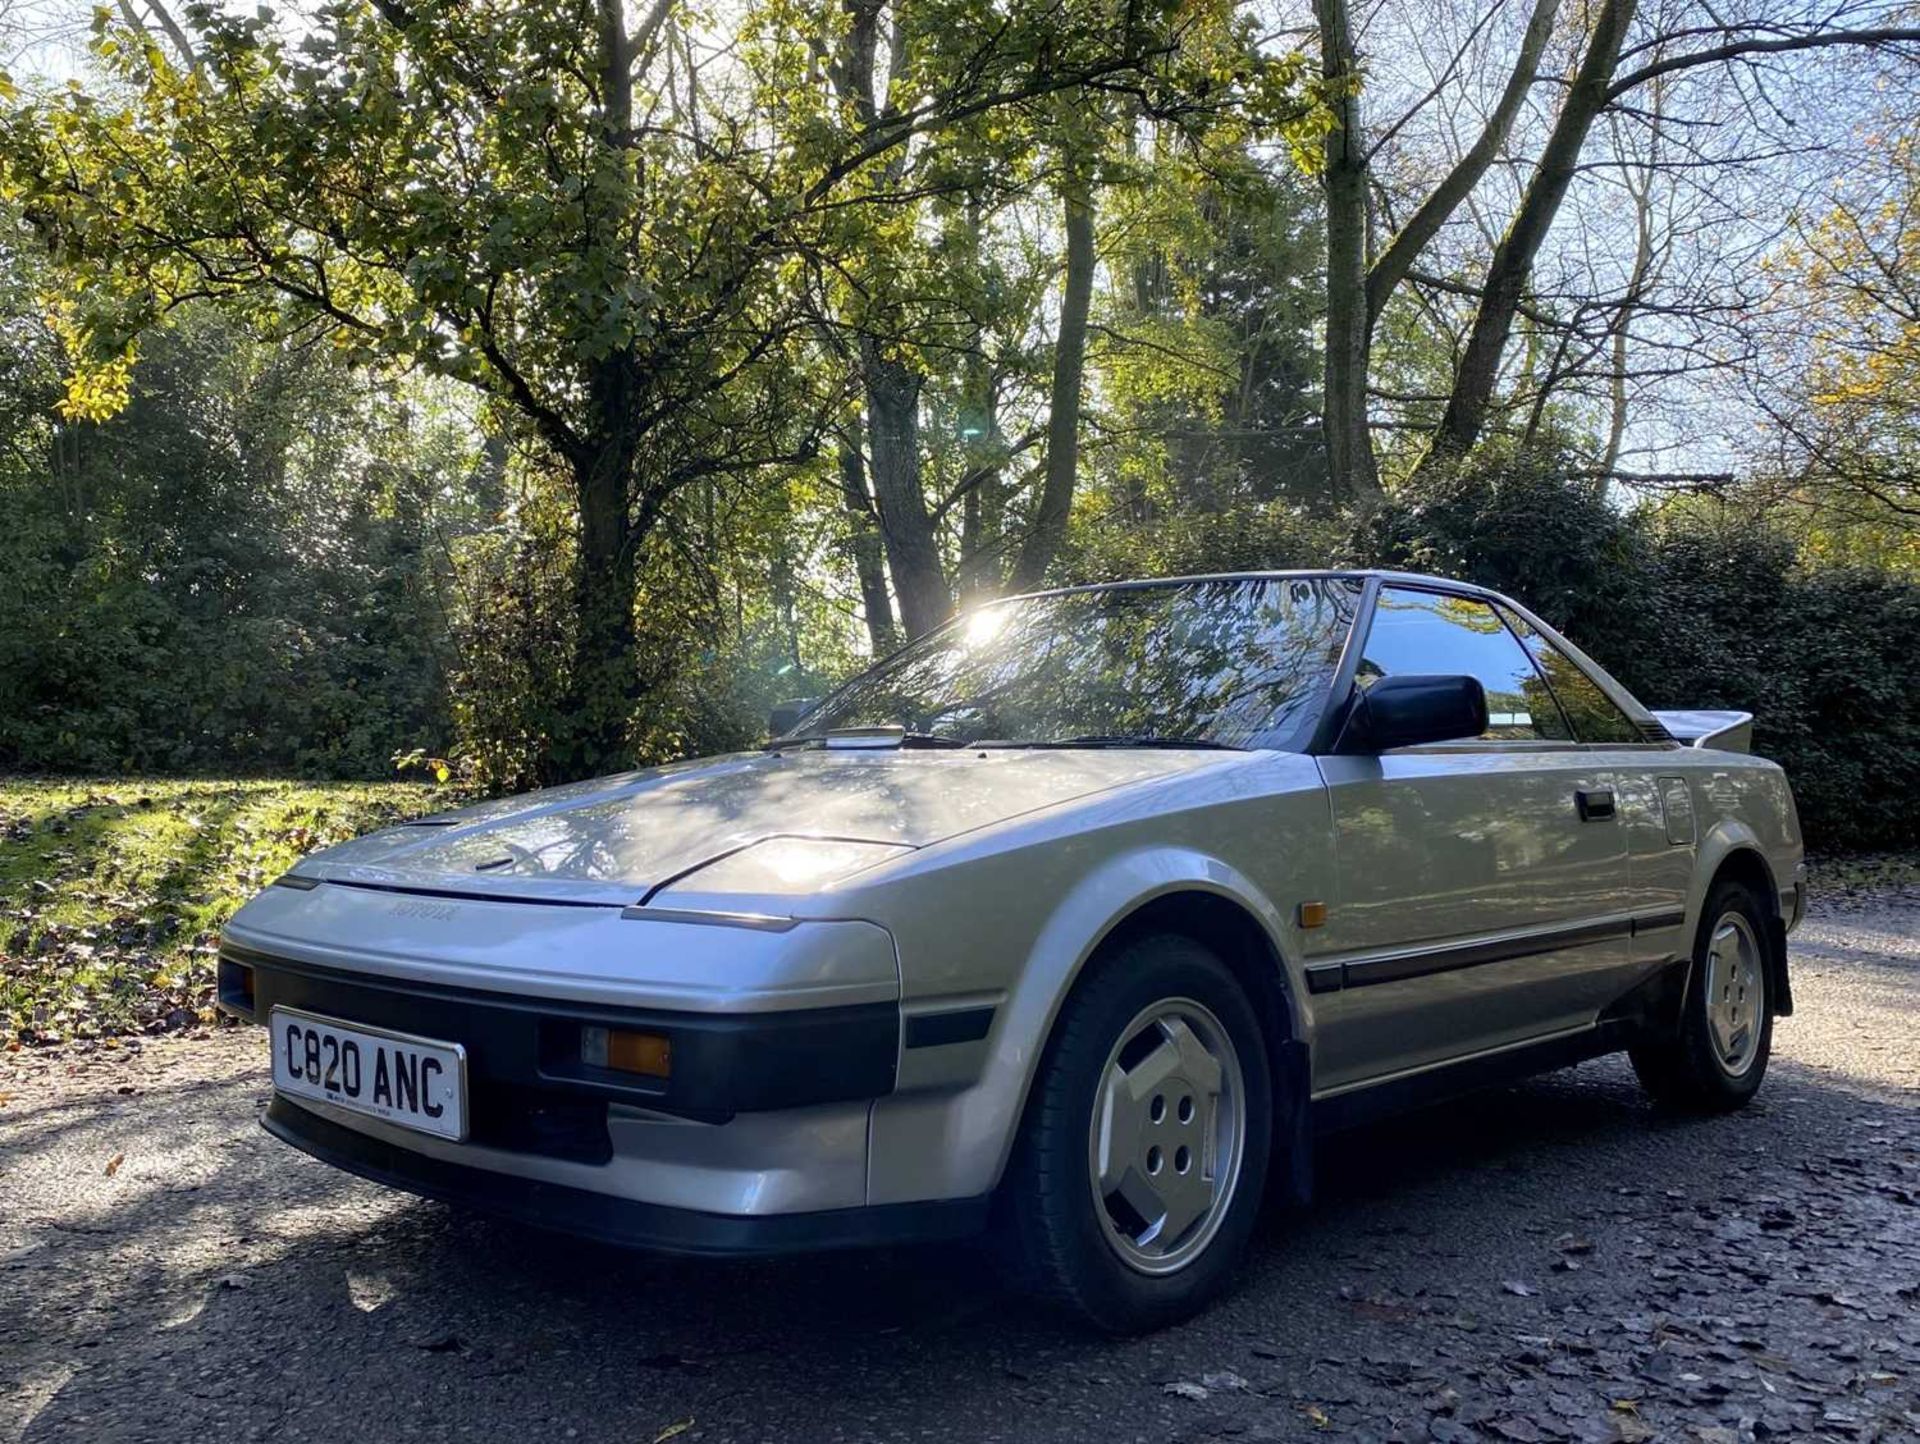 1985 Toyota MR2 Coupe Restored example of an appreciating modern classic - Image 6 of 100